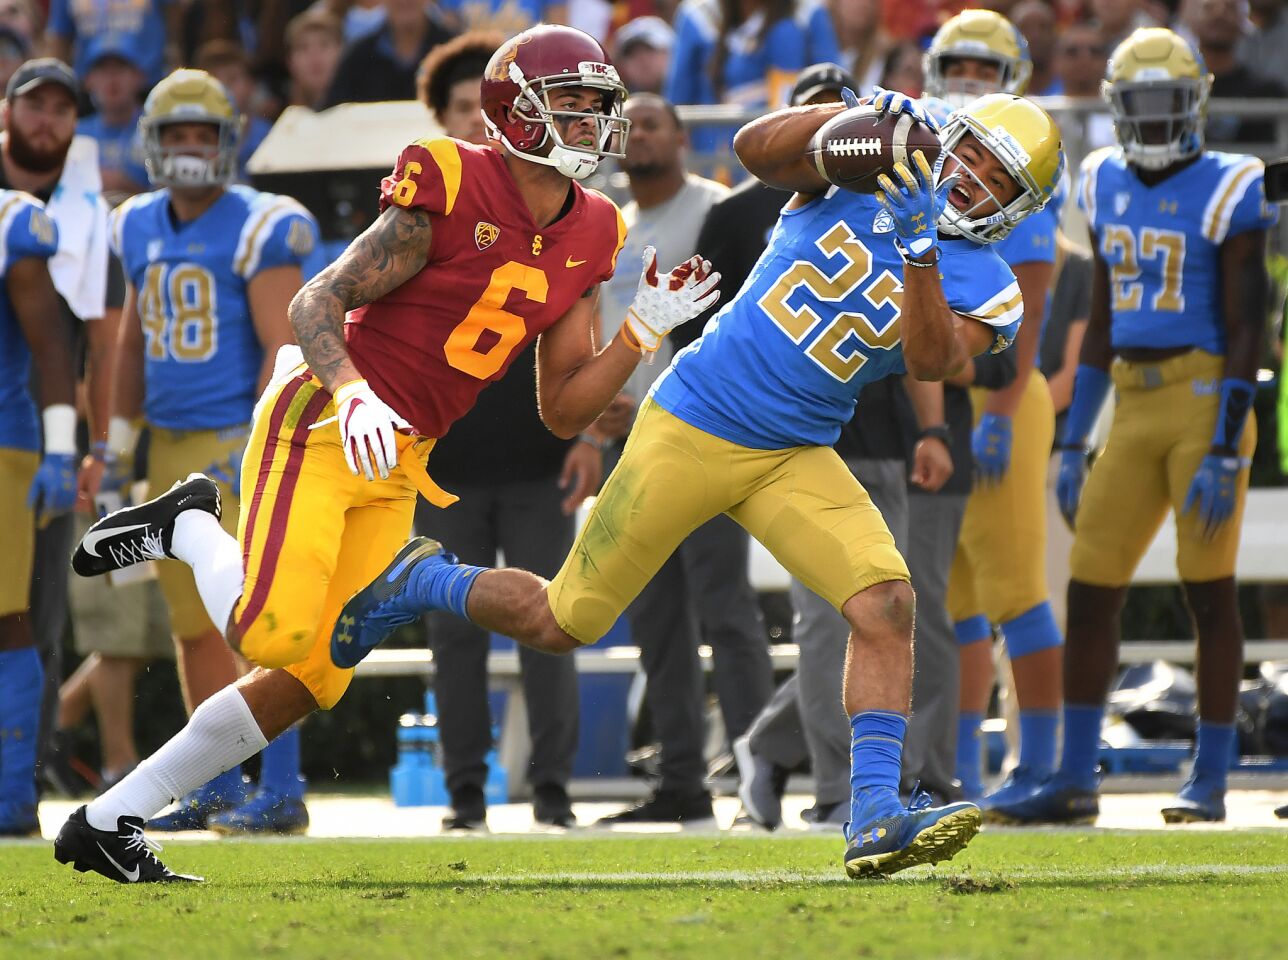 UCLA defensive back Nate Meadors intercepts a pass in front of USC receiver Michael Pittman Jr. in the second quarter Saturday at the Rose Bowl.